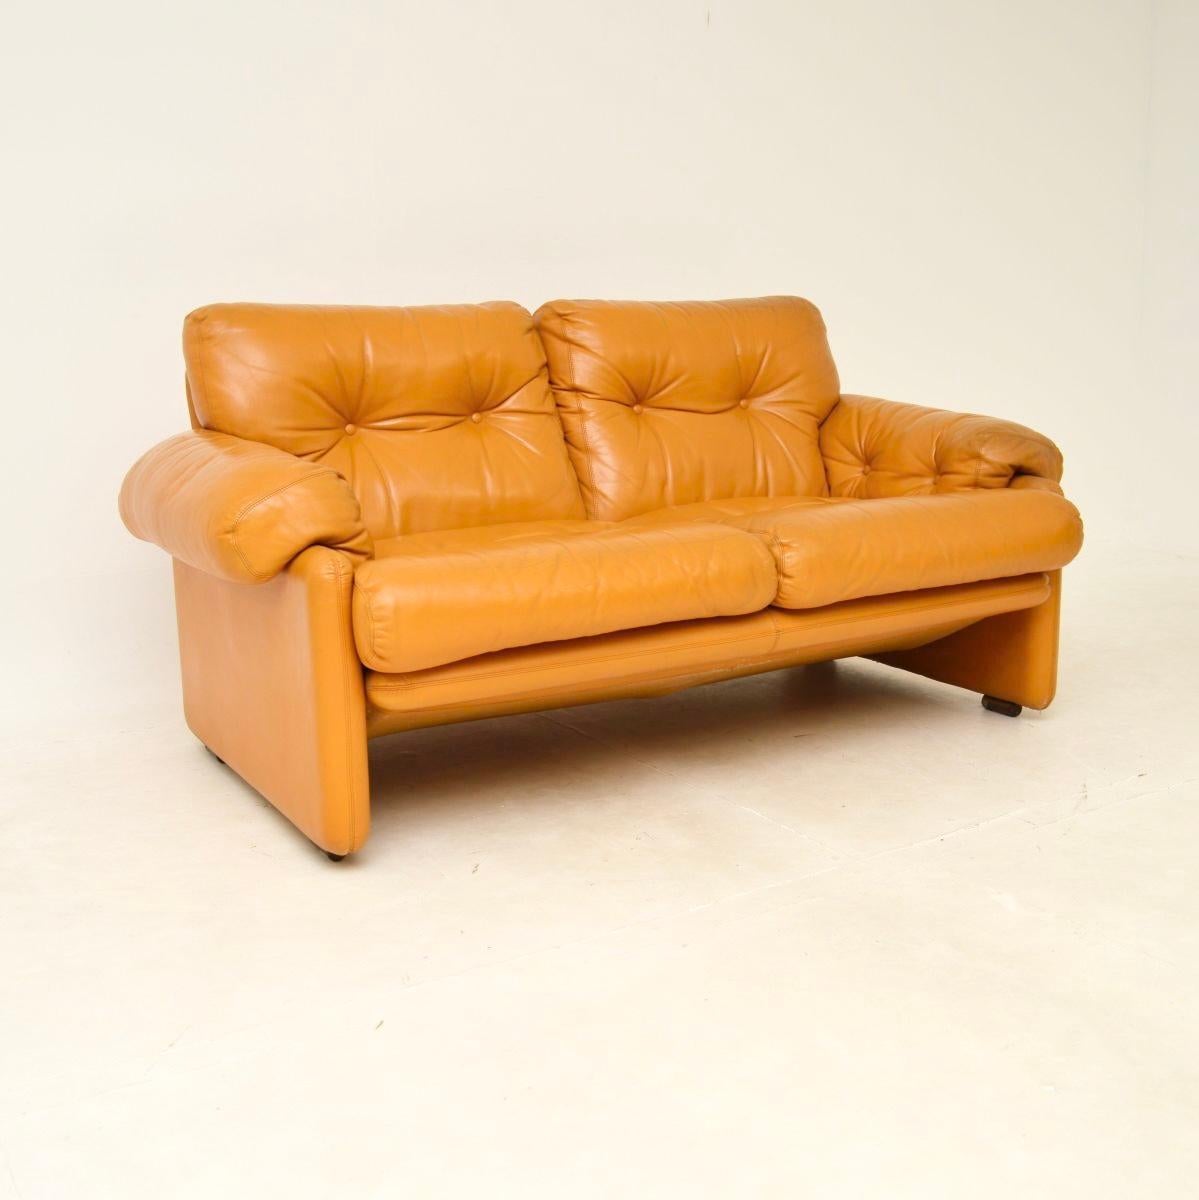 A stylish and extremely comfortable vintage Italian leather Coronado sofa and stool by C&B Italia. This was designed by Tobia Scarpa, it was made in Italy in the 1970’s.

The leather has a gorgeous mustard colour, this is of extremely high quality